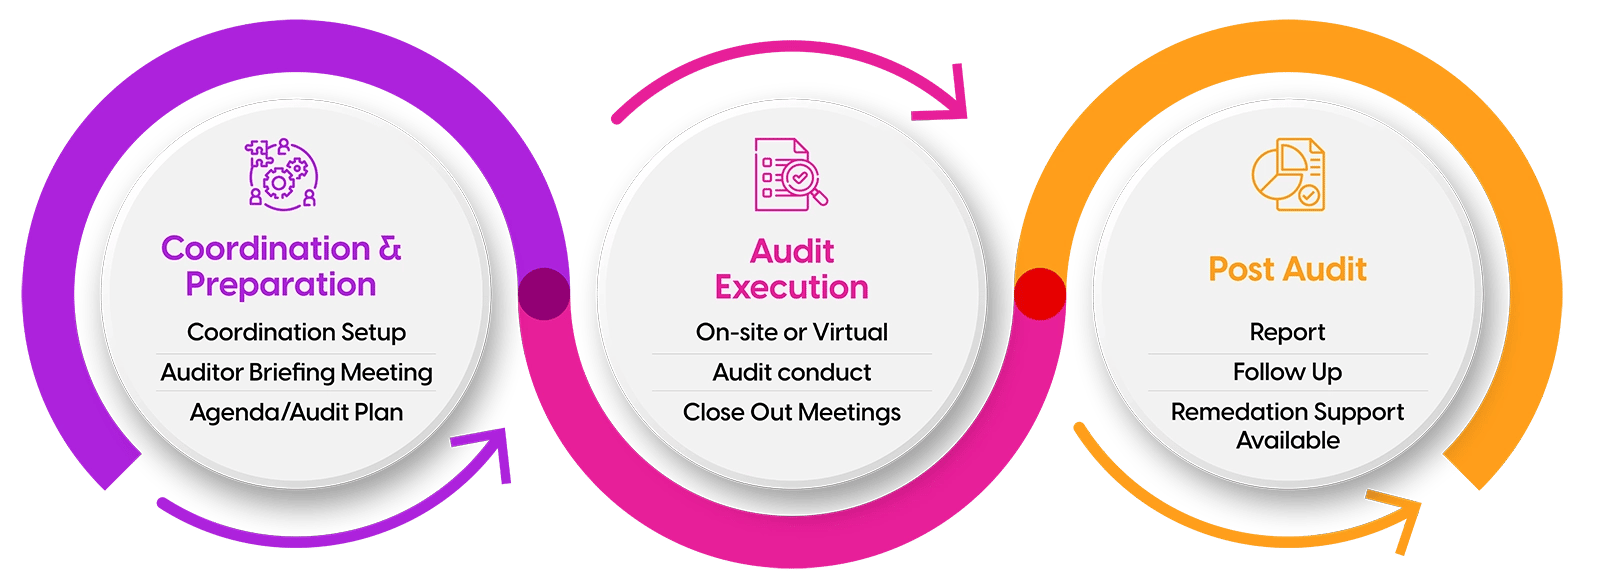 Graphic showing how different stages of outsourcing GxP audits interact through the lifecycle of the audit project.